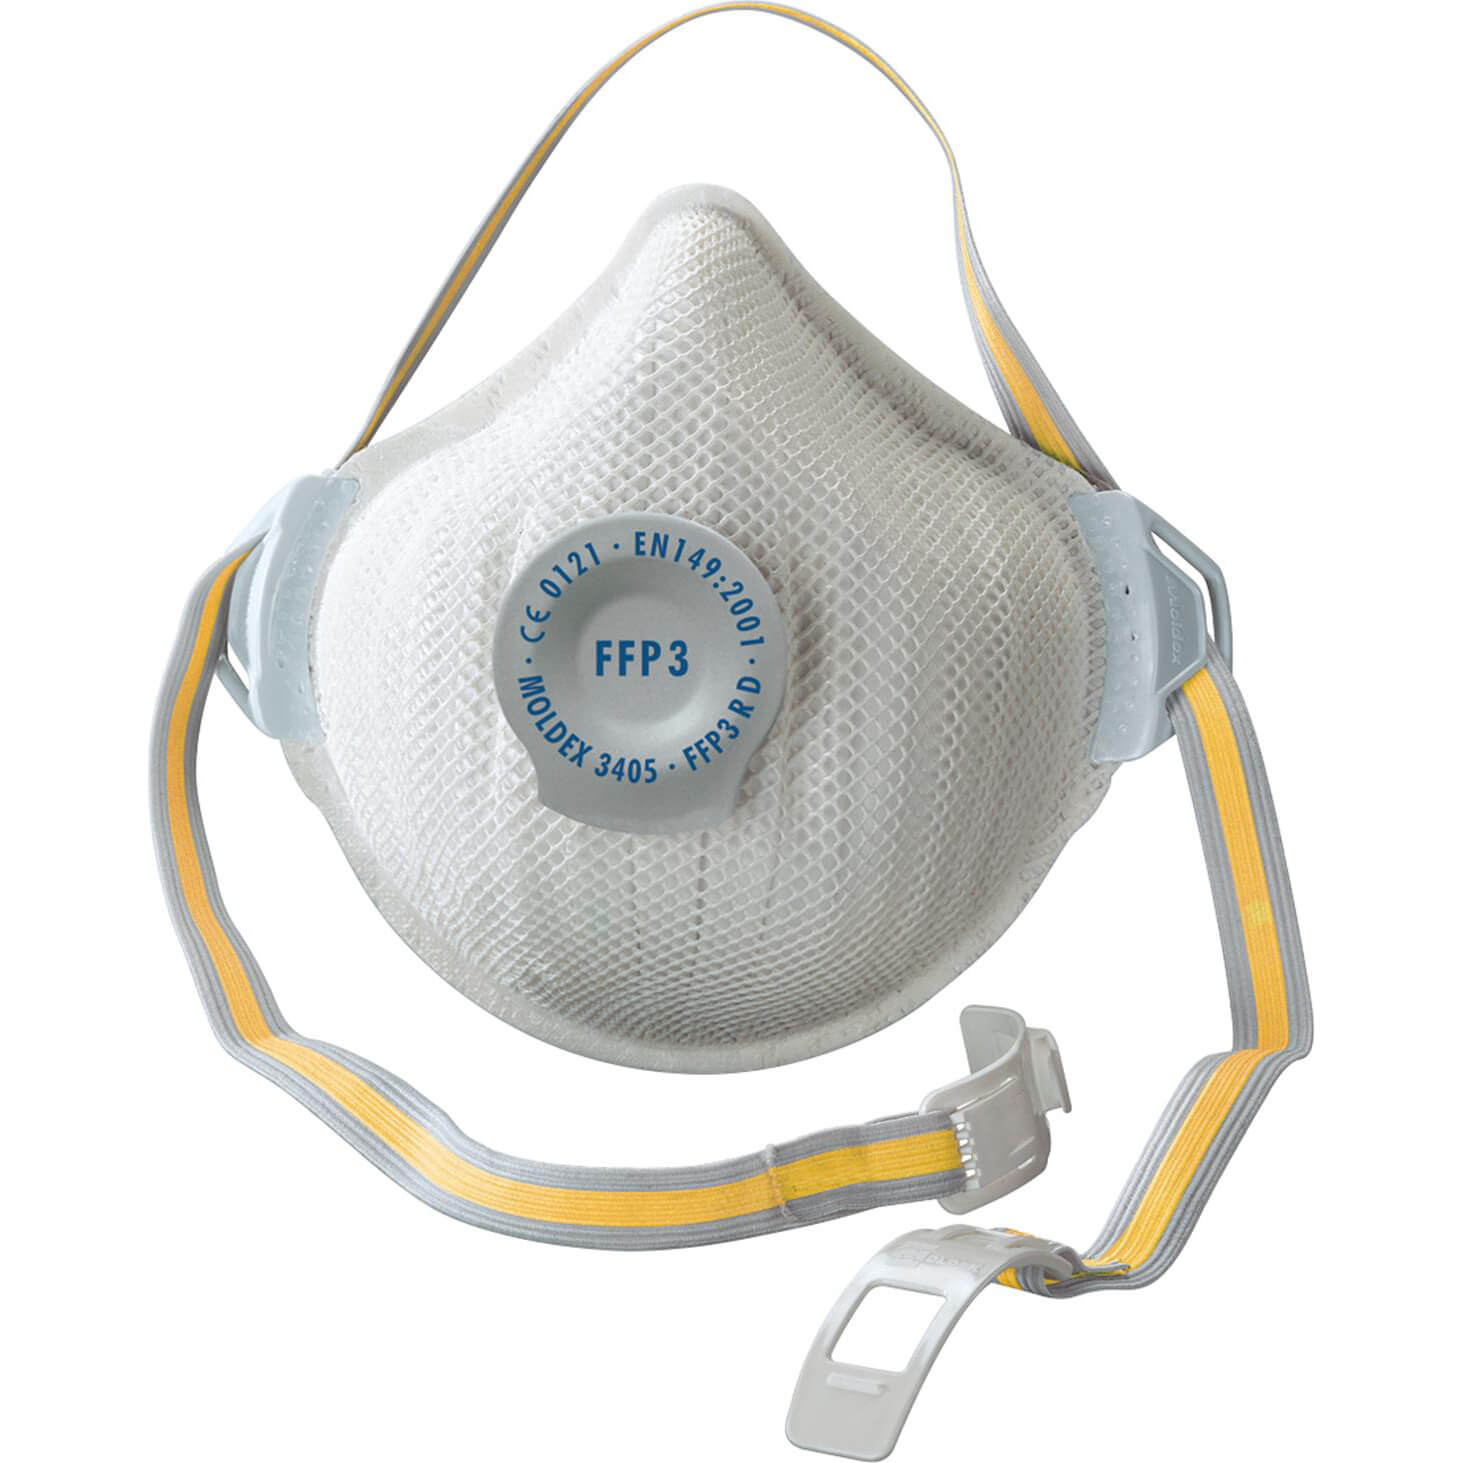 Image of Moldex 3405 AirPlus Moulded Mask FFP3 Pack of 5